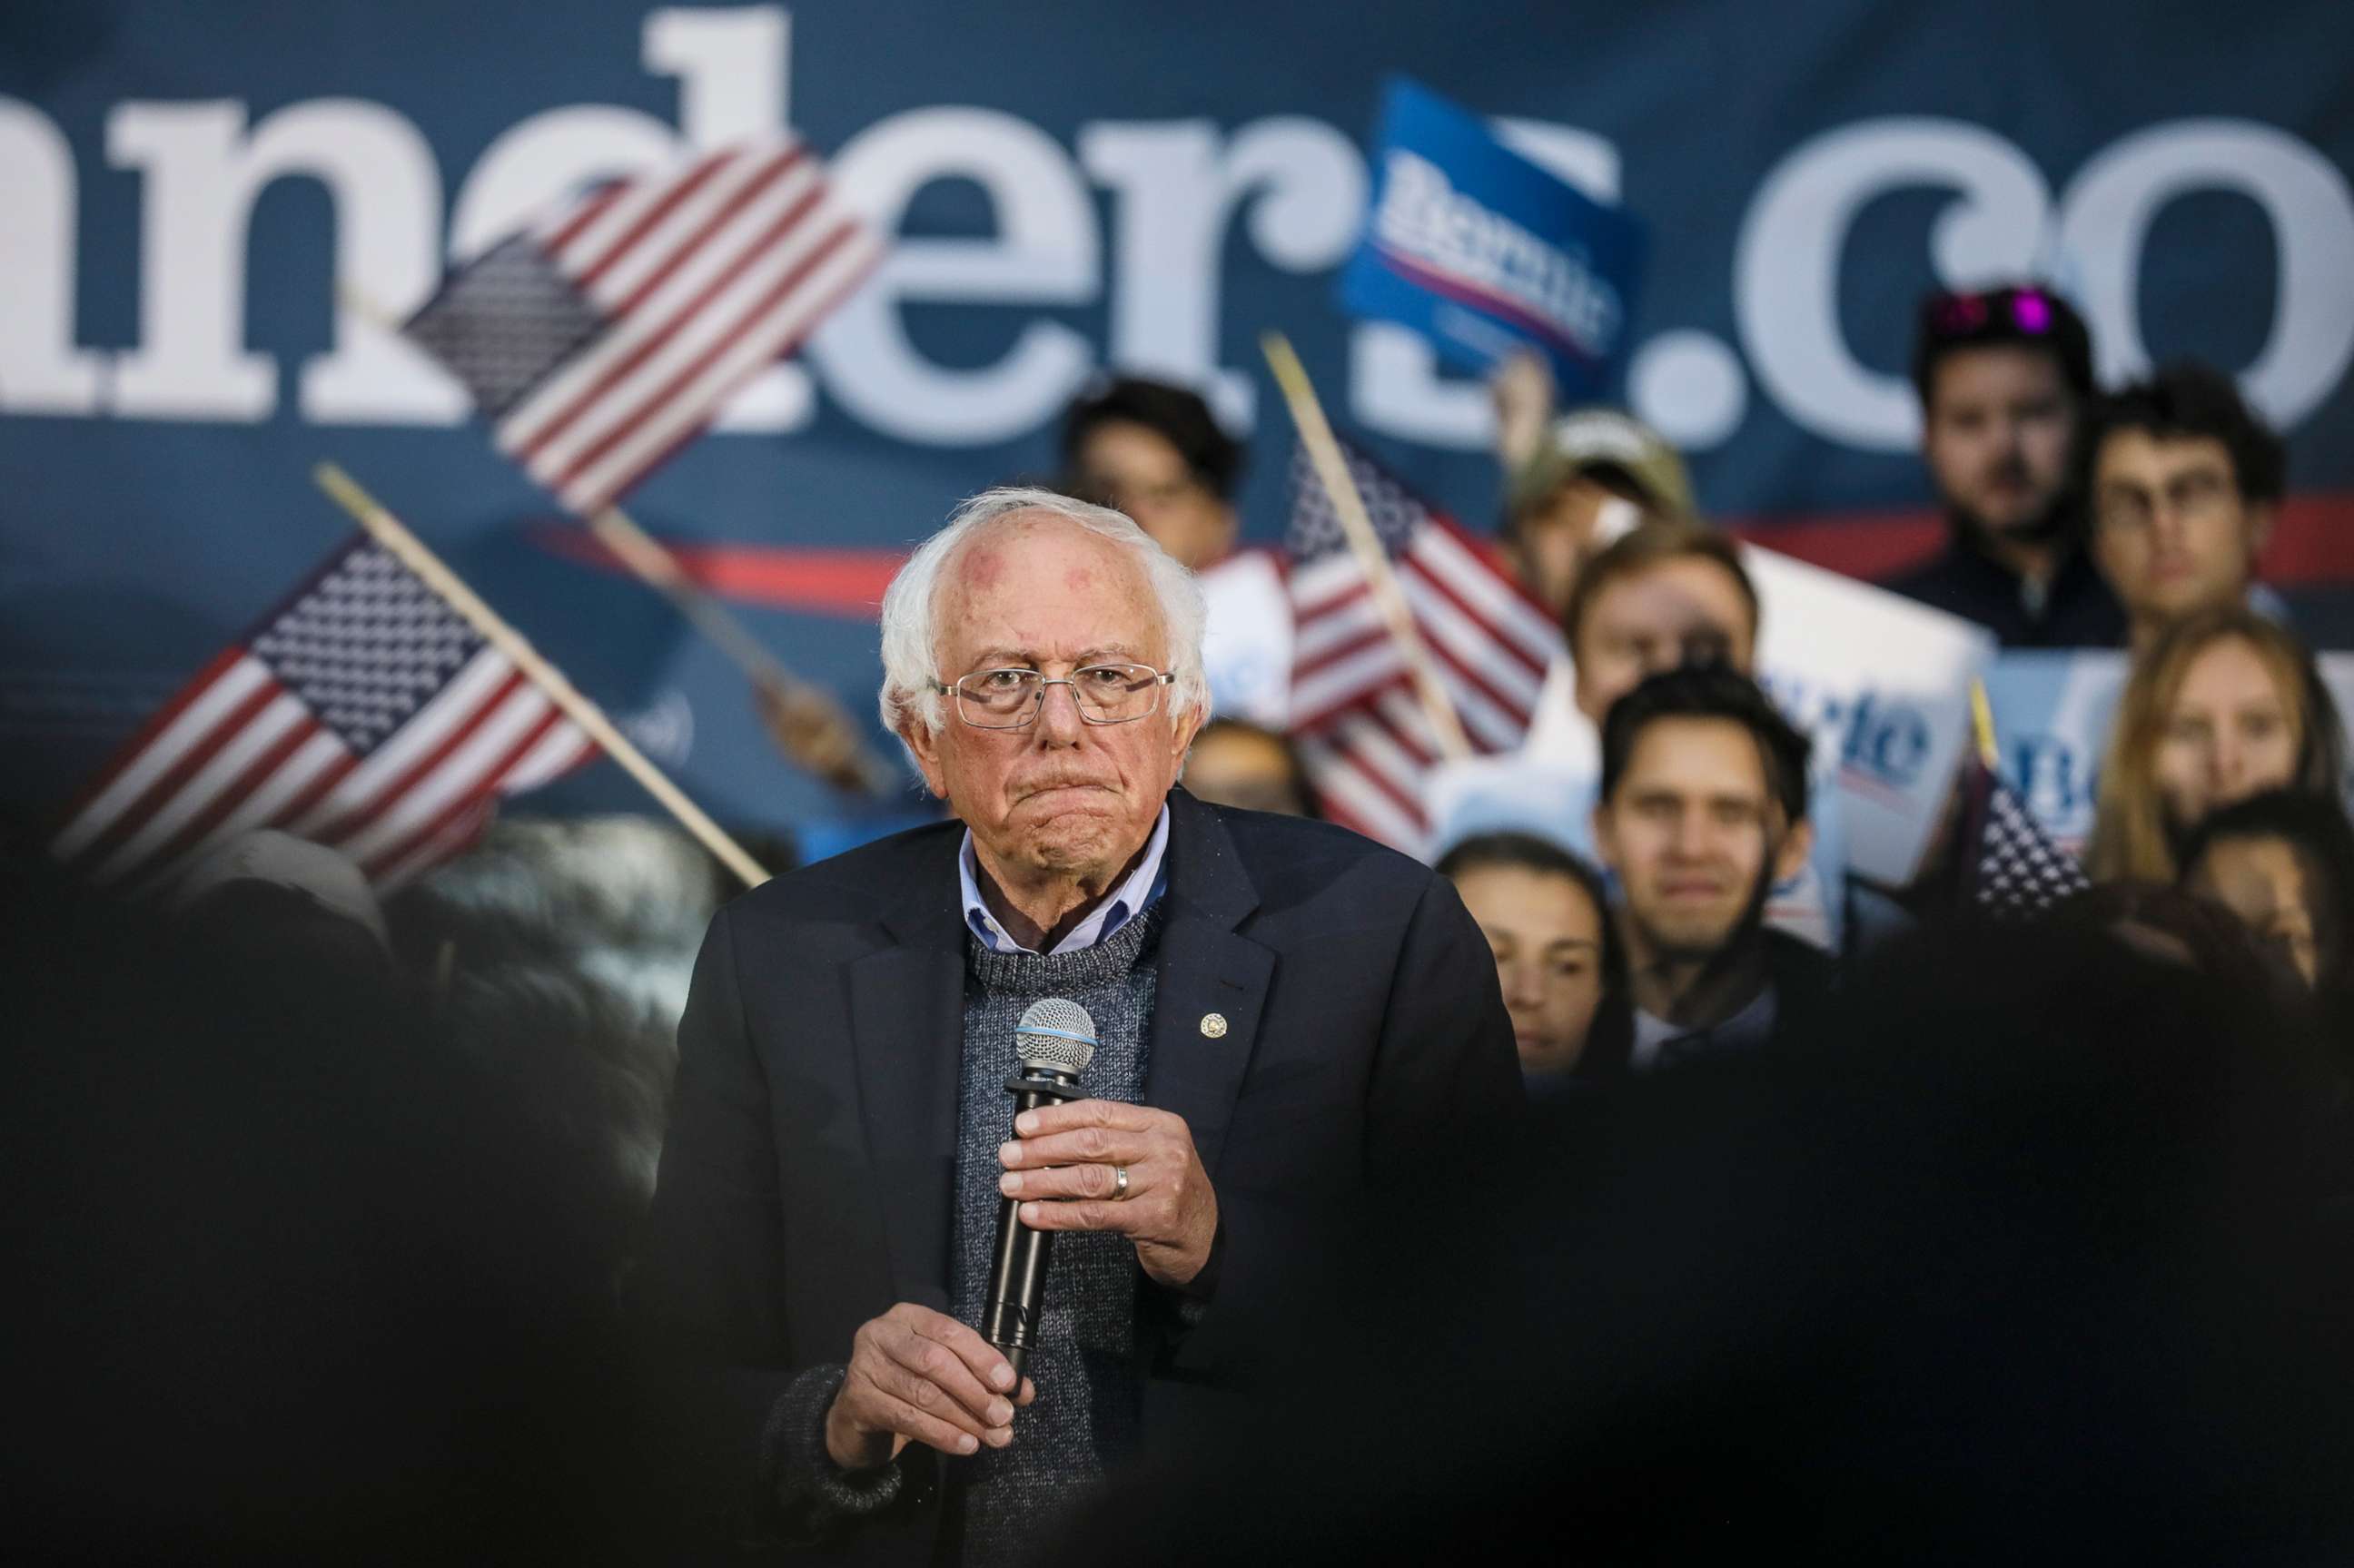 PHOTO: Democratic presidential candidate Sen. Bernie Sanders pauses while speaking at a campaign event, Sept. 29, 2019, in Hanover, N.H.